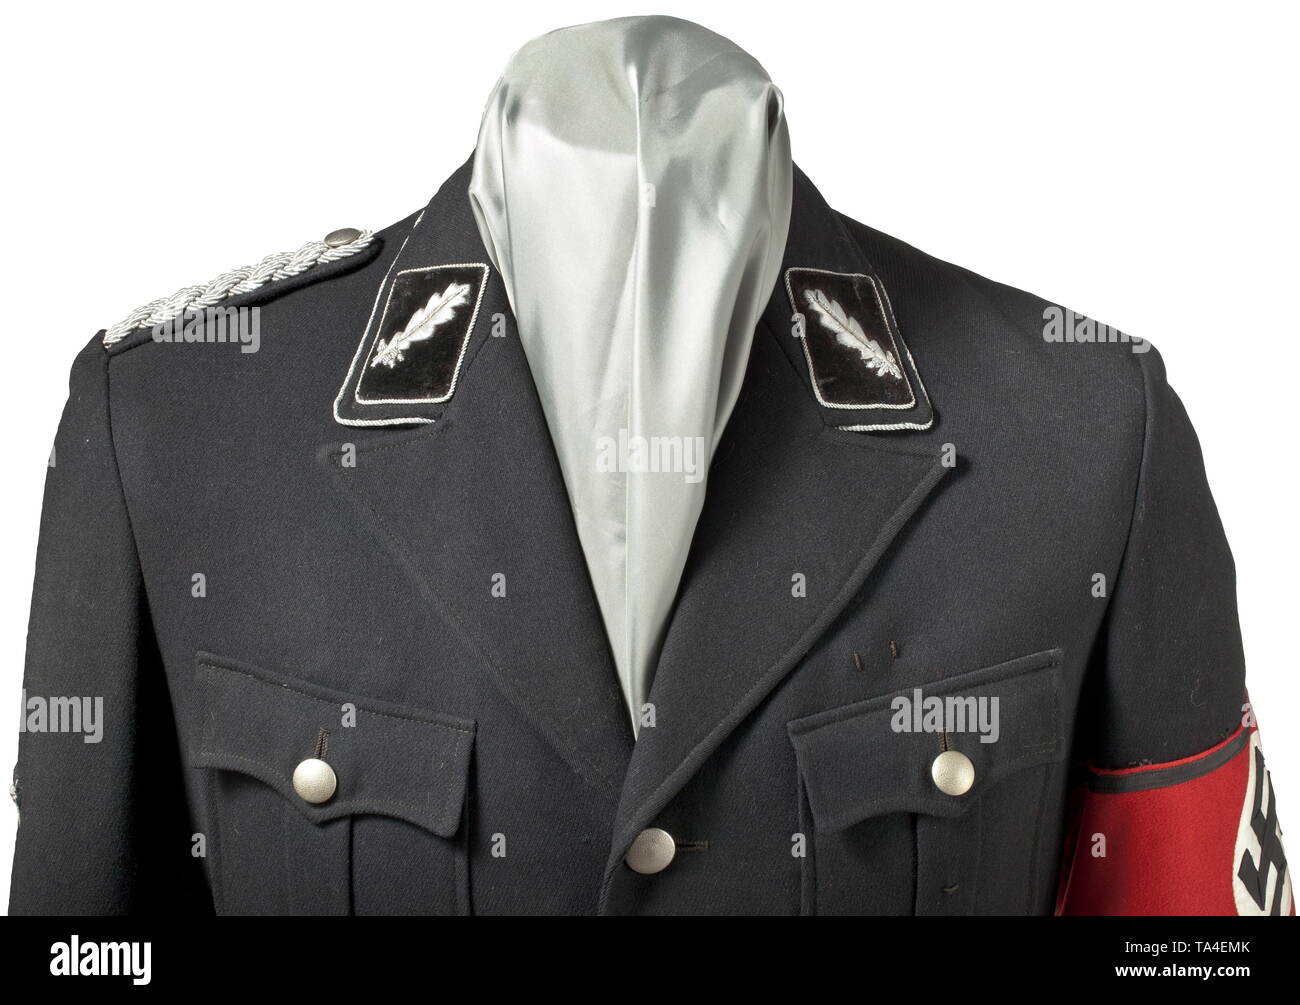 A service uniform for an SS-Standartenführer as an Amtschef (department head) in the Reichsführung-SS depot pieces from the Reichszeugmeisterei Service tunic M 32 made of black garbadine with finely punched RZM buttons, black imitation silk and sewn-on D-ring inside the waist bag to attach chain dagger. Tracks of SS-RZM label on inside pocket. Silver collar cord. Black velvet collar patches with silver-embroidered oak leaves and silver cord trimming. Sewn-on shoulder patch with silver interwoven cords. 'Alte Kämpfer' sleeve chevron with silver-embroidered star for former po, Editorial-Use-Only Stock Photo